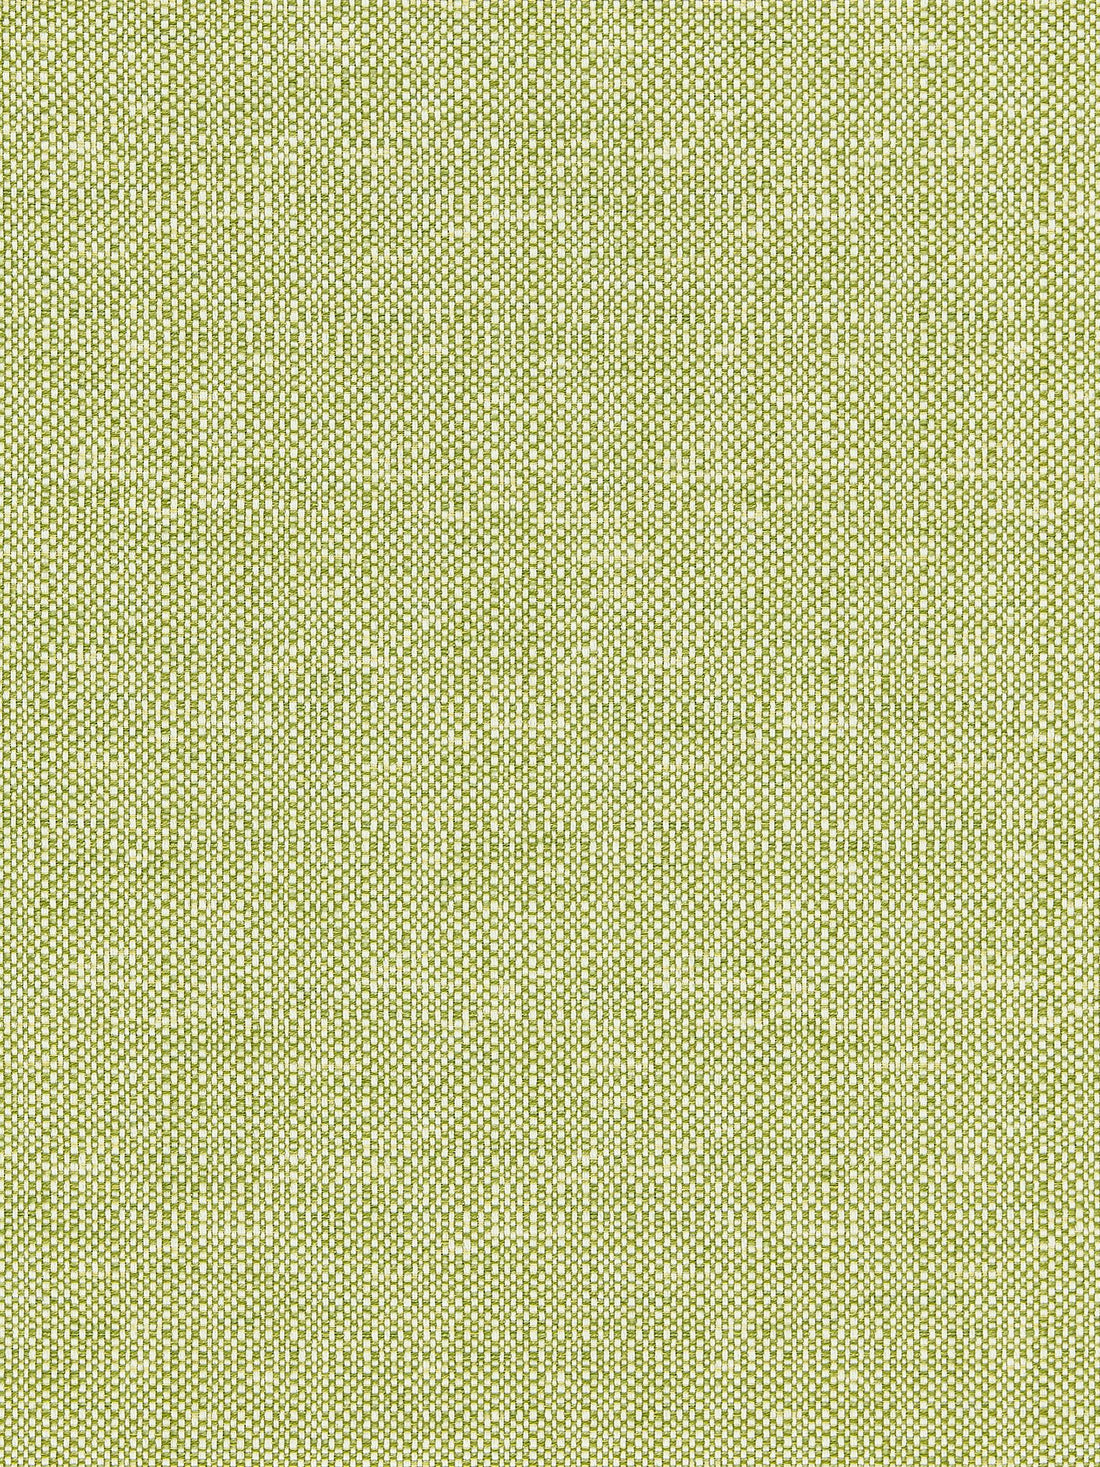 Chester Weave fabric in leaf color - pattern number BK 0004K65118 - by Scalamandre in the Old World Weavers collection